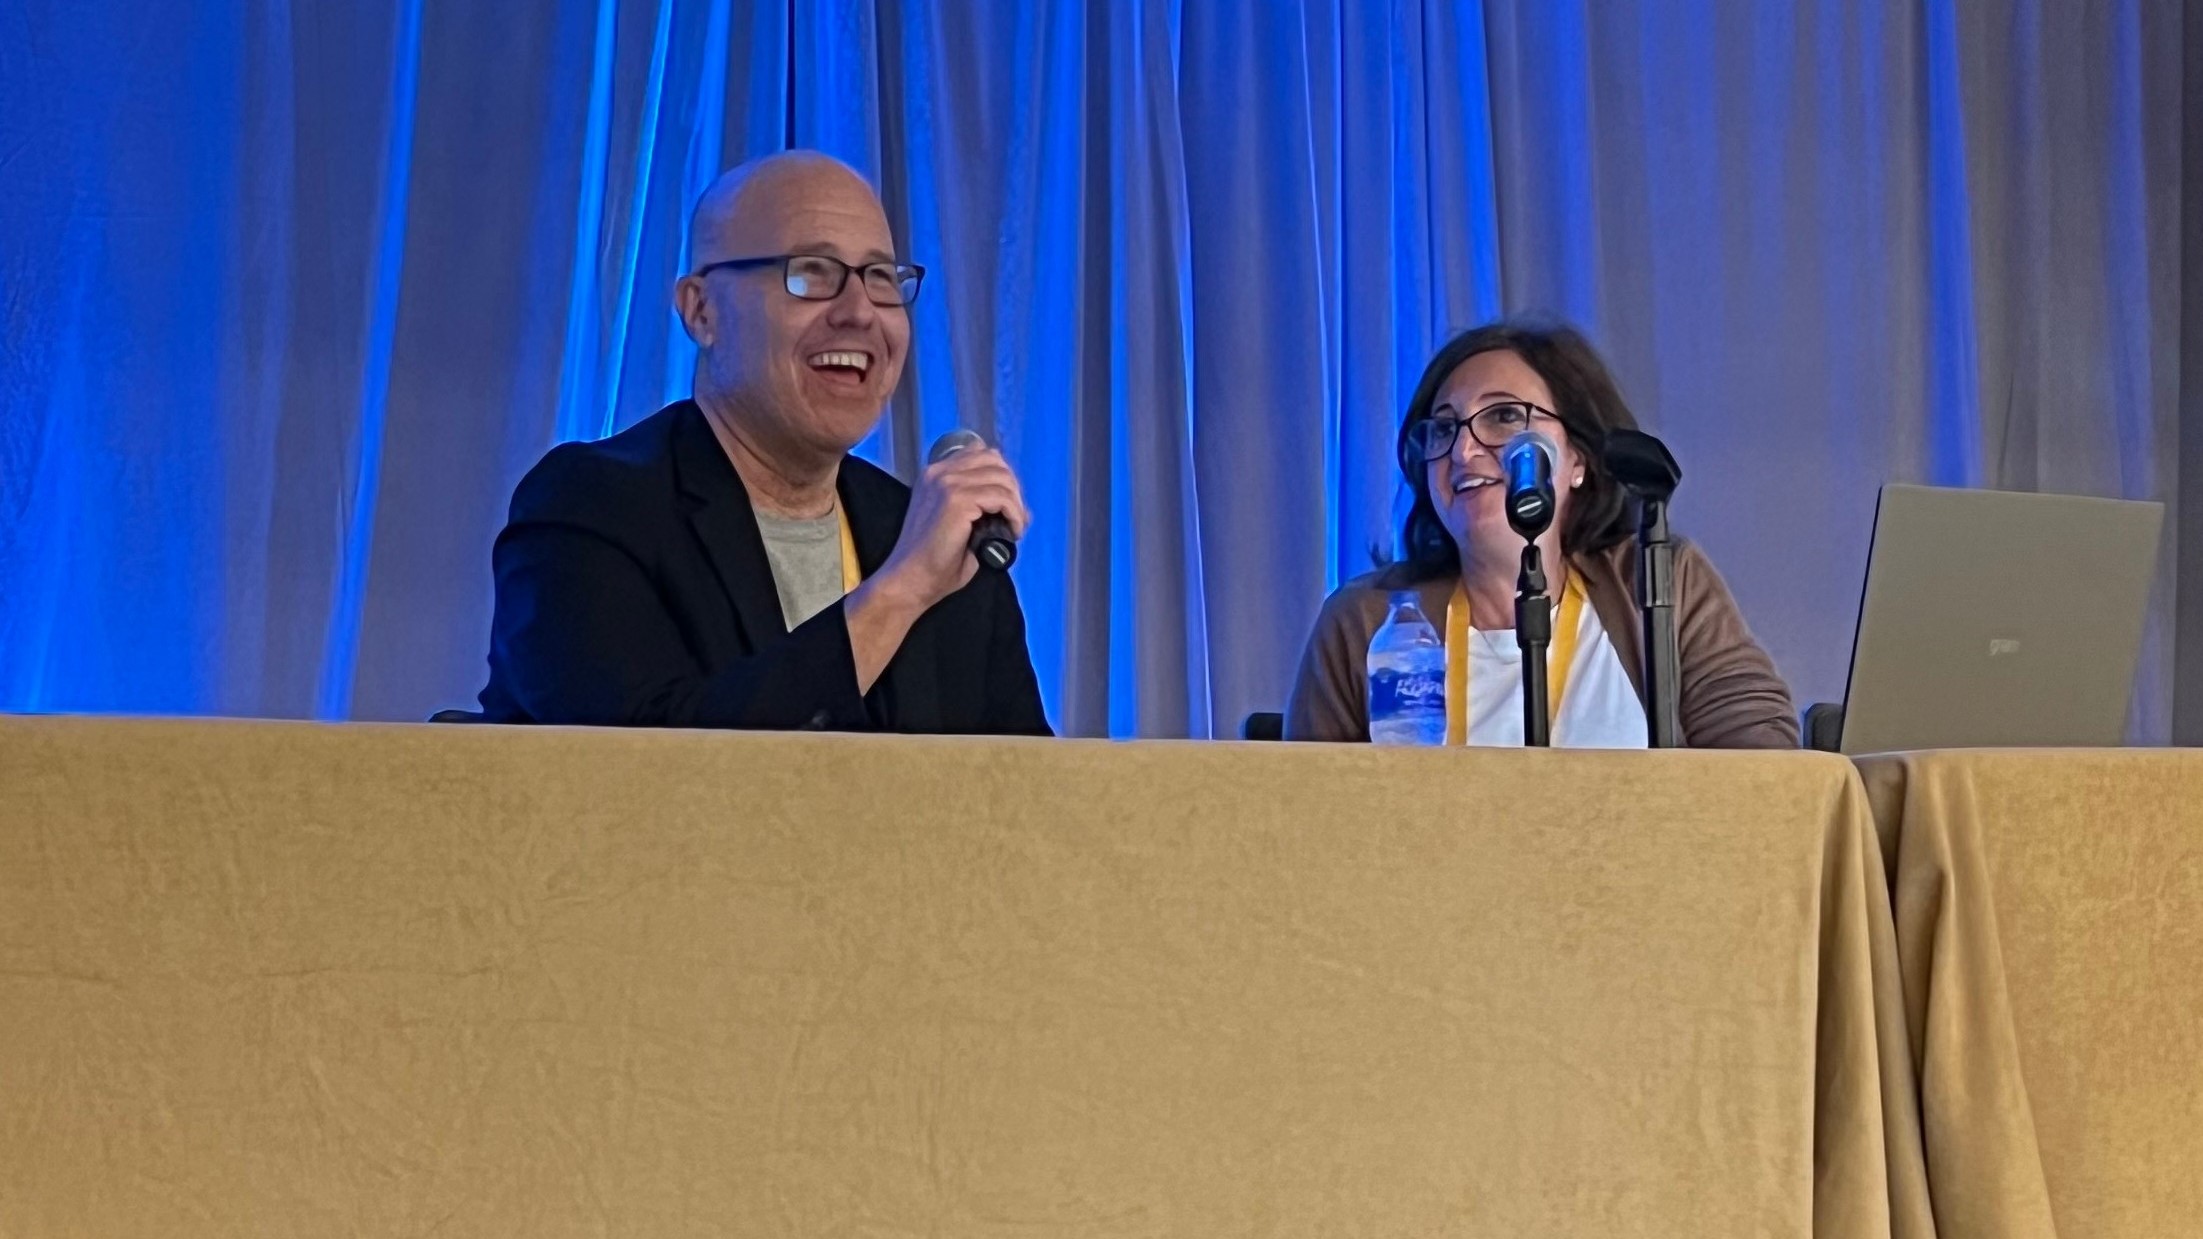 Bill Friedman and Ana Handshuh speaking together at a table with microphones at the RISE HEDIS 2022 conference